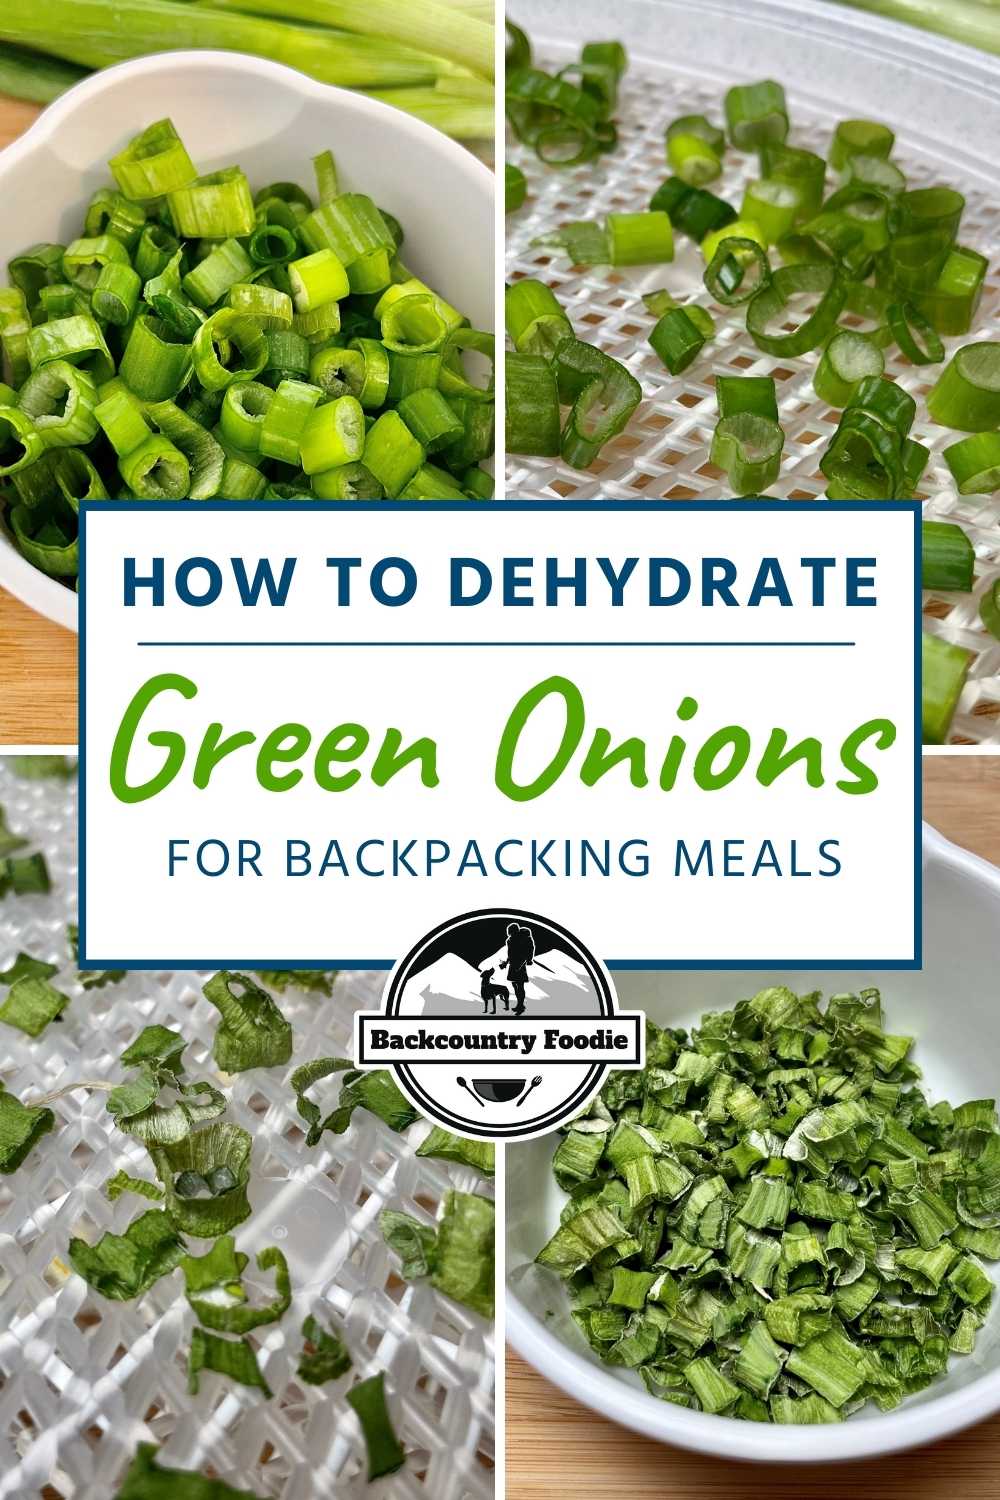 Learn how to safely dehydrate or freeze-dry green onions for backpacking meals and enjoy a Veggie Pho Noodle Soup recipe! #howtodehydrategreenonions #howtofreezedrygreenoions #dehydrated scallions #backpackingmealideas #howtodehydratefood #backcountryfoodie